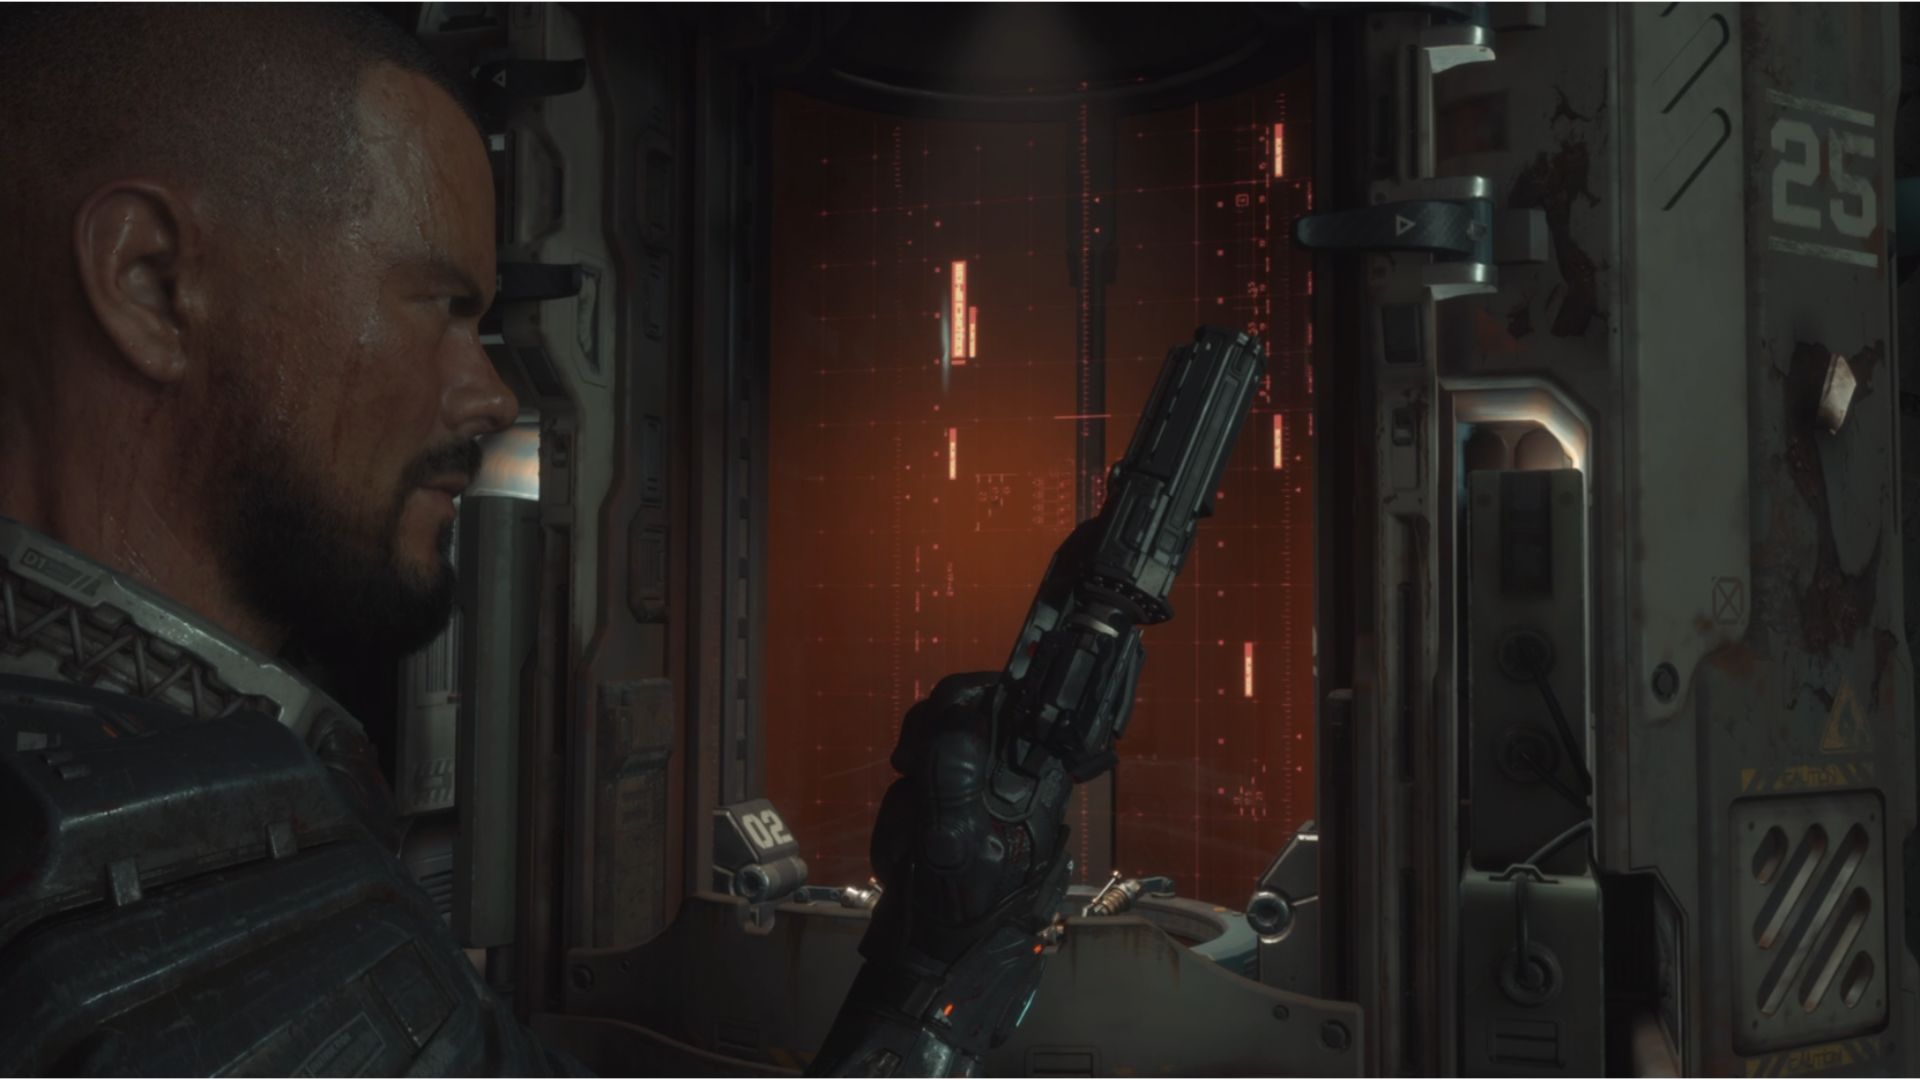 The Callisto Protocol Weapons: Jacob can be seen holding the tactical pistol